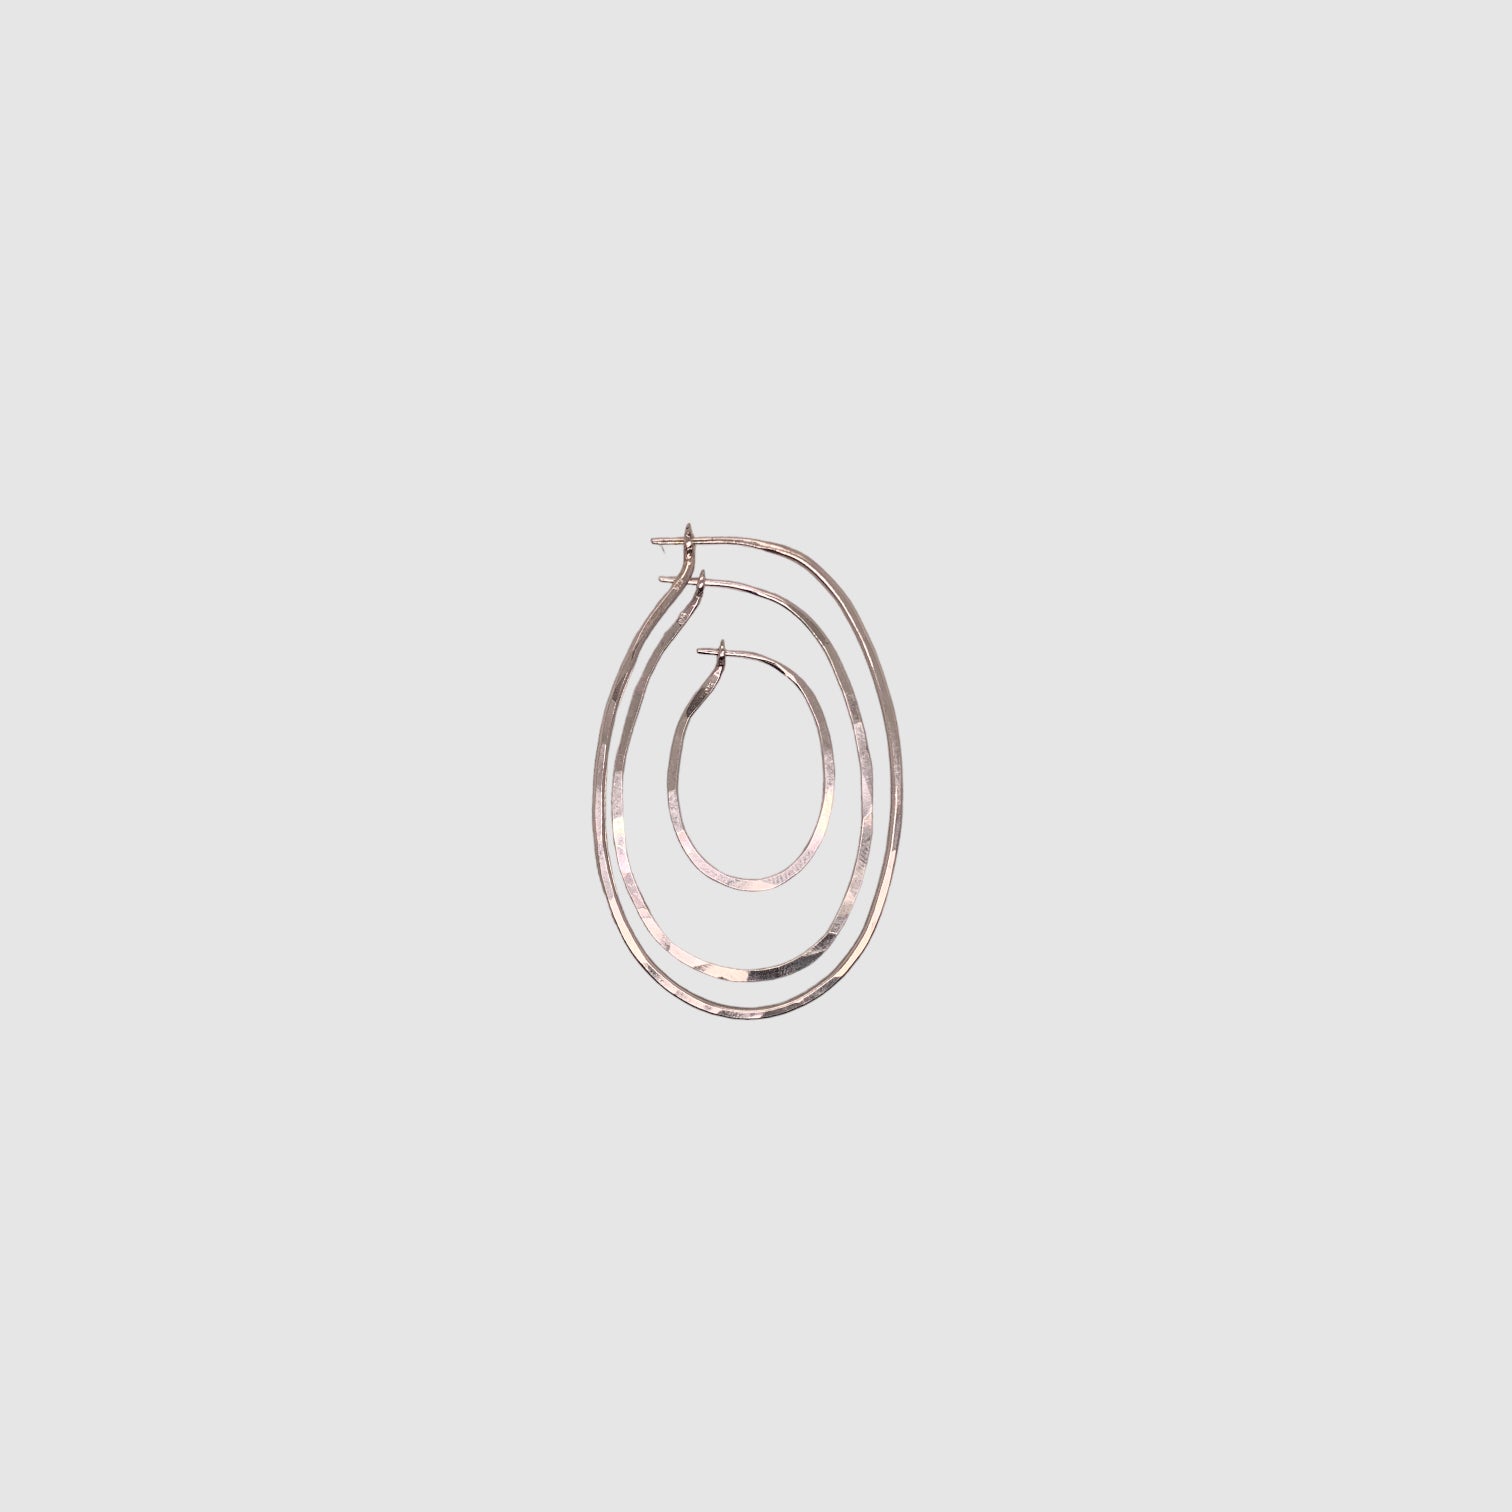 HOOPS // SMALL // OVAL // SILVER